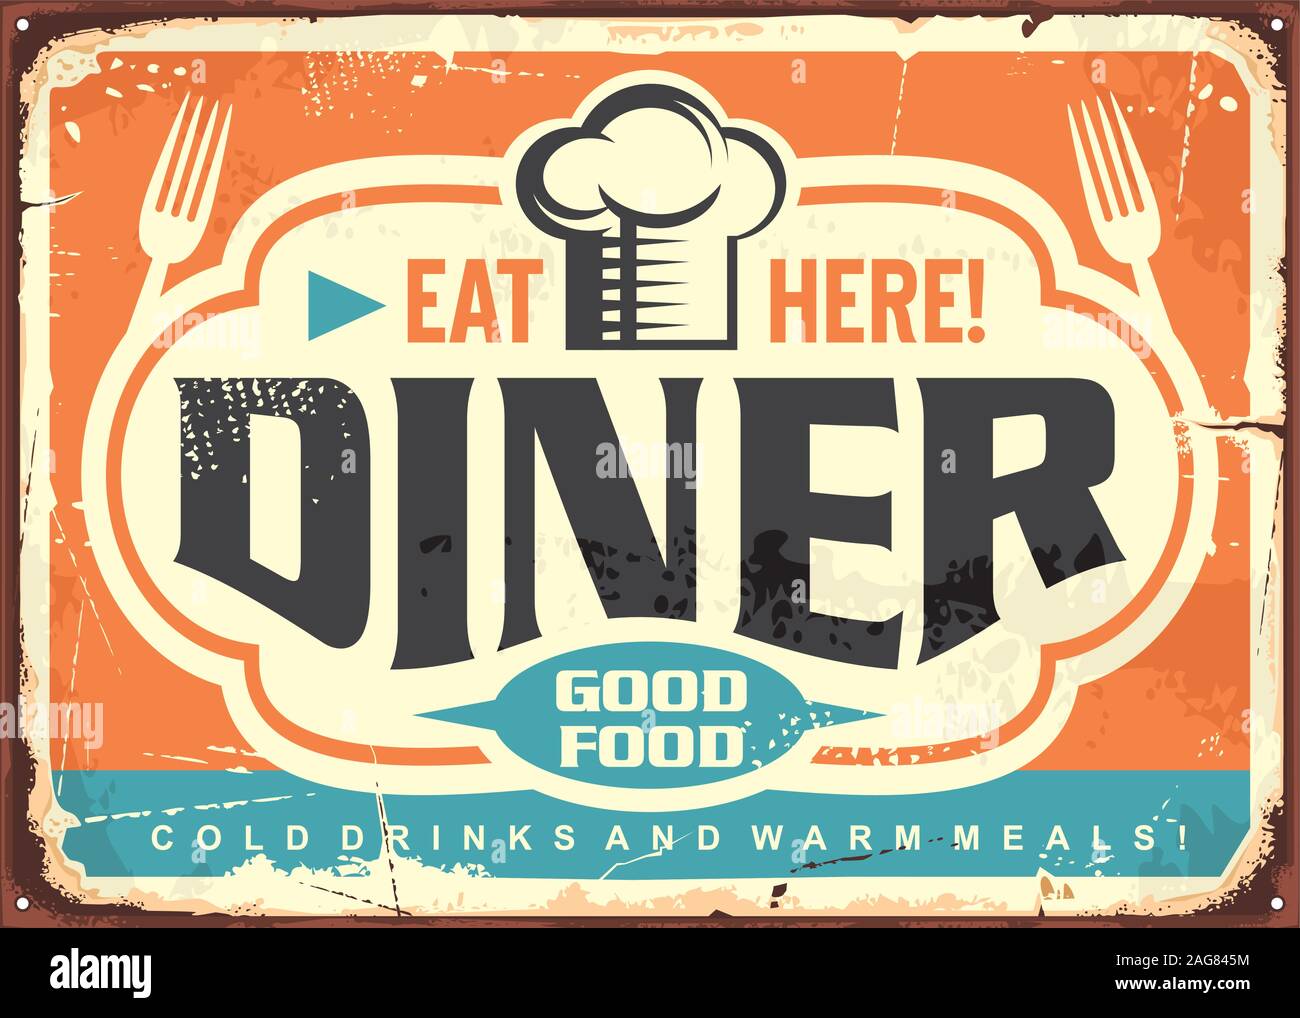 Retro diner restaurant tin sign design with chef hat, forks and creative lettering. Good food, cold drinks and warm meal vintage vector poster. Stock Vector